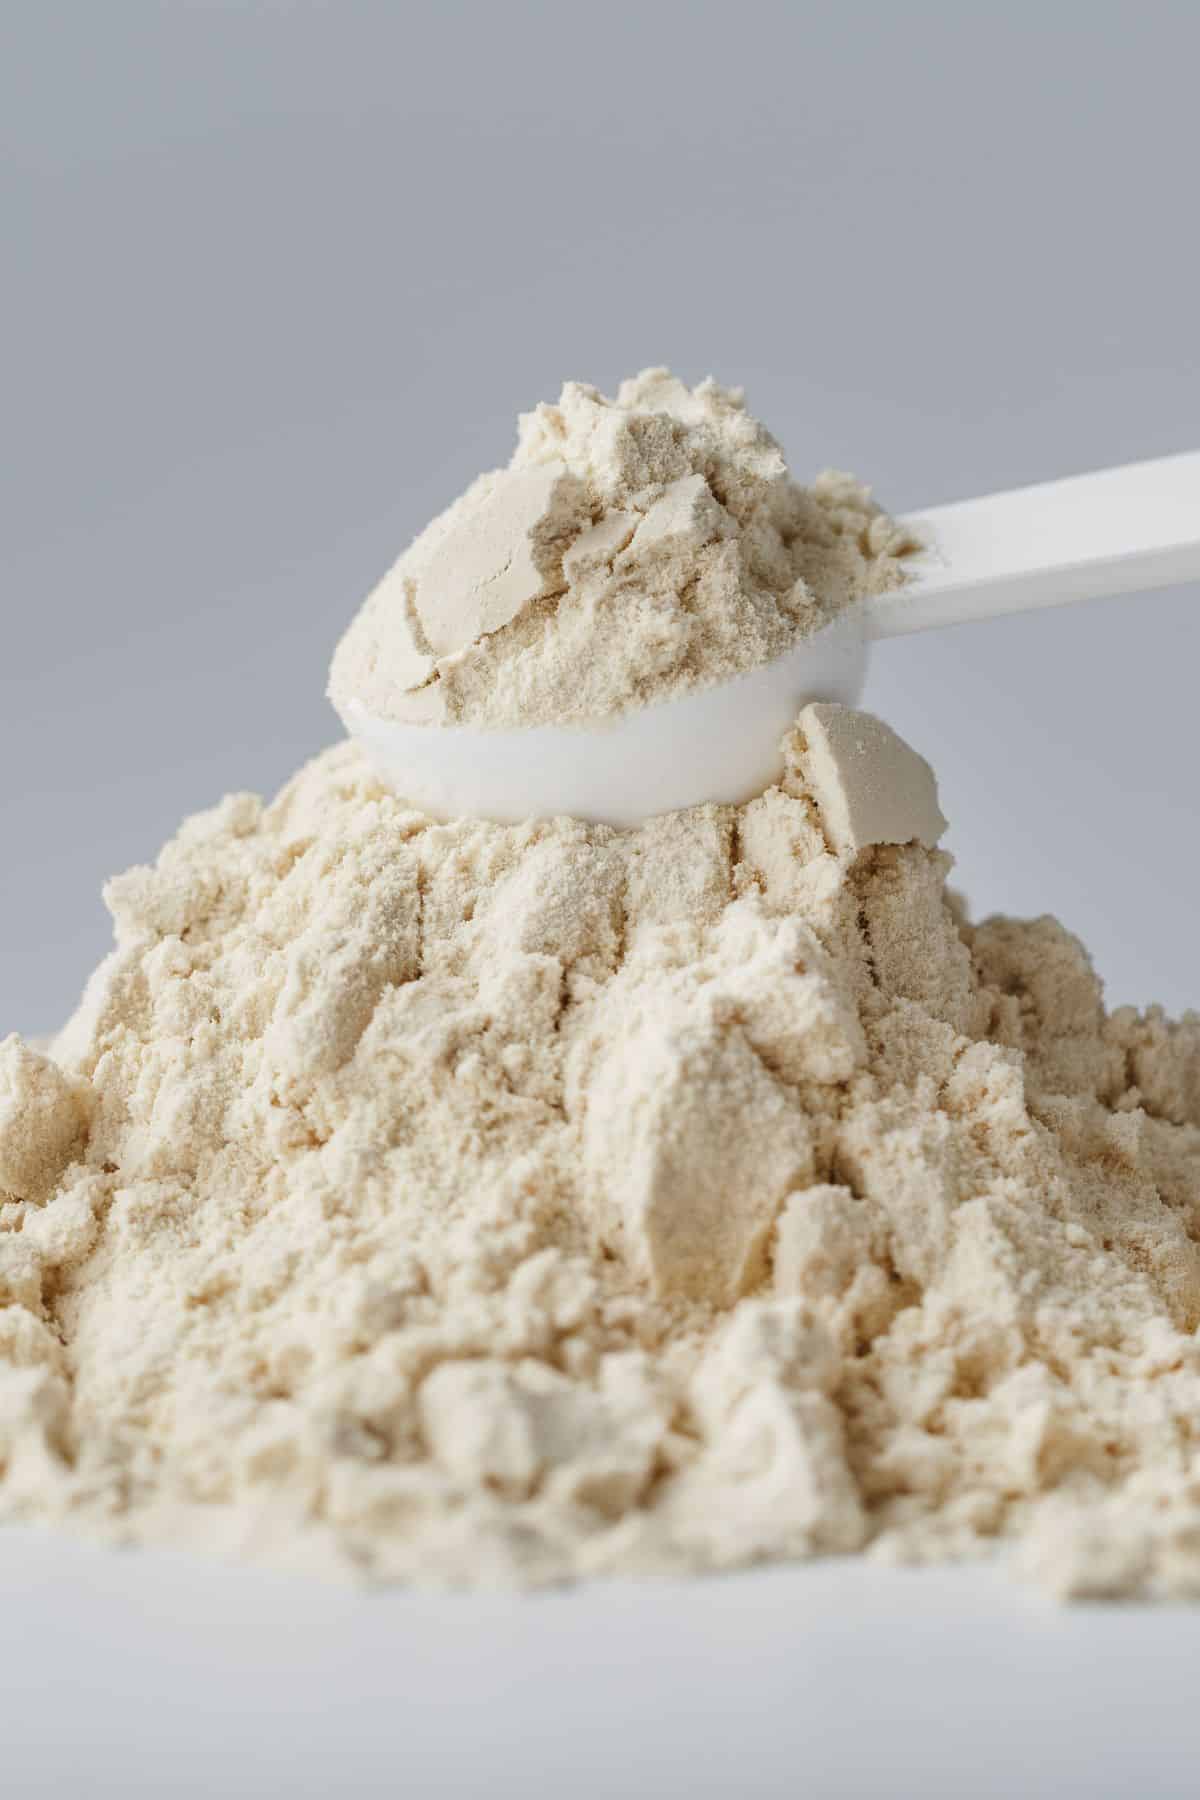 a scoop of soy protein isolate on top of a mound of soy protein isolate.